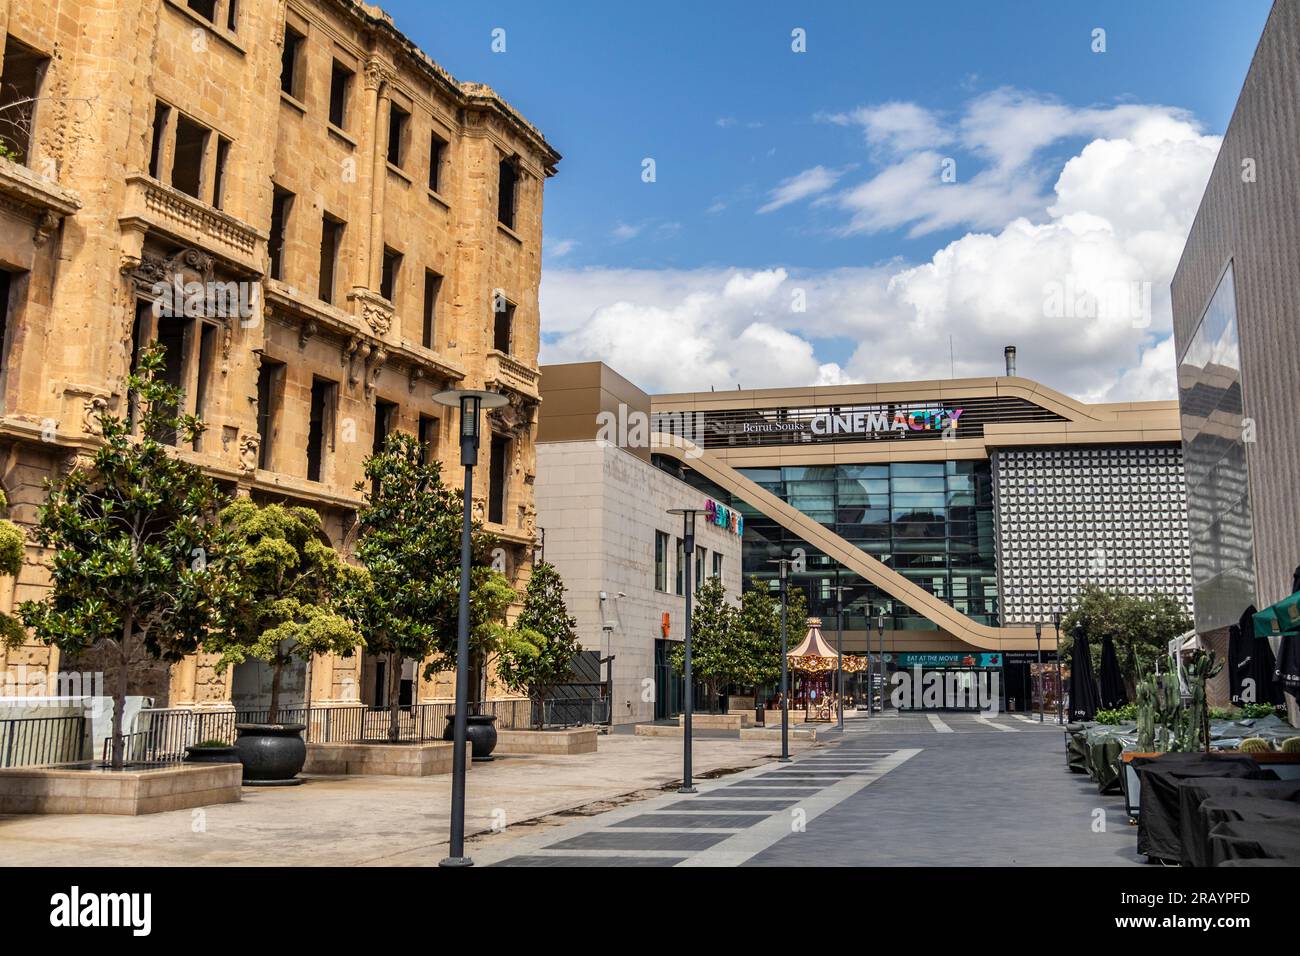 Beirut Souks, the only outdoor mall in the city Stock Photo